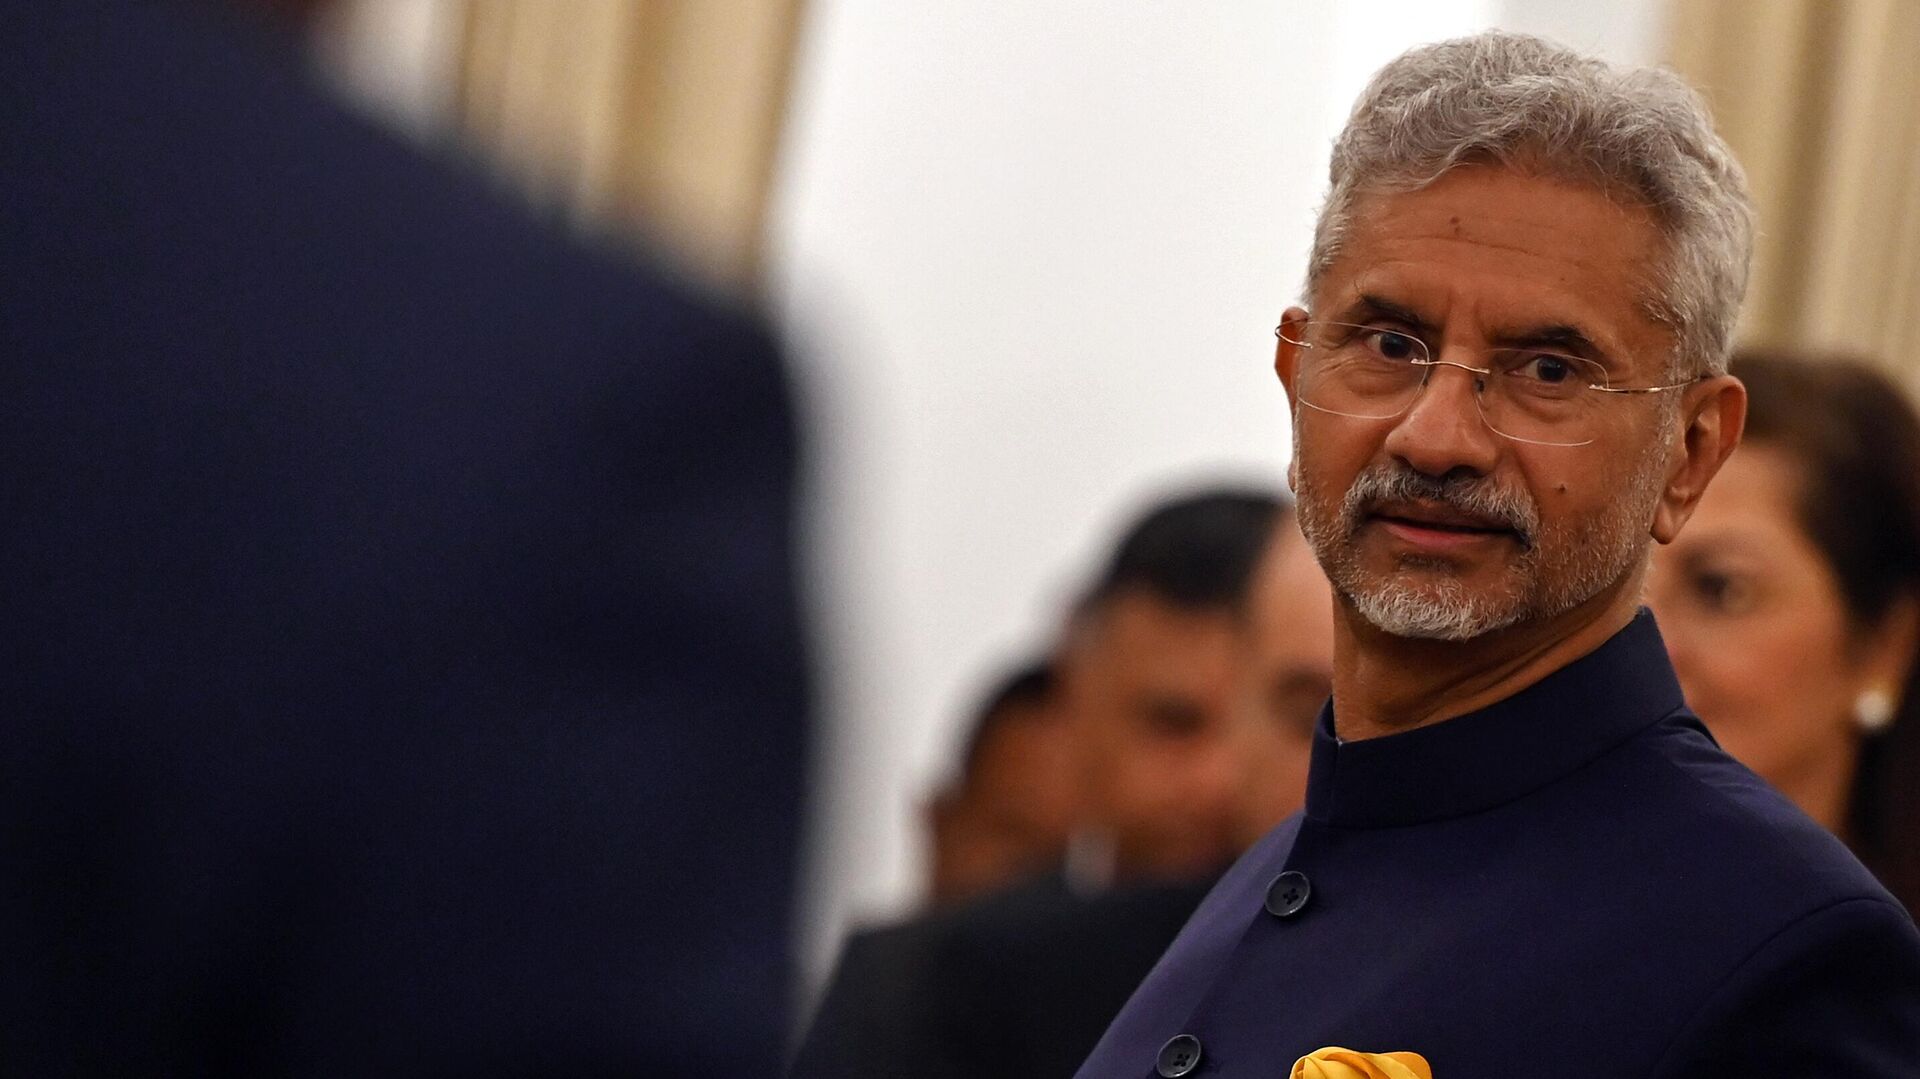 India's Foreign Minister Subrahmanyam Jaishankar attends an exchange of agreements between India’s Prime Minister Narendra Modi and Egypt’s President Abdel Fattah al-Sisi at the Hyderabad House in New Delhi on January 25, 2023. - Sputnik India, 1920, 20.02.2023